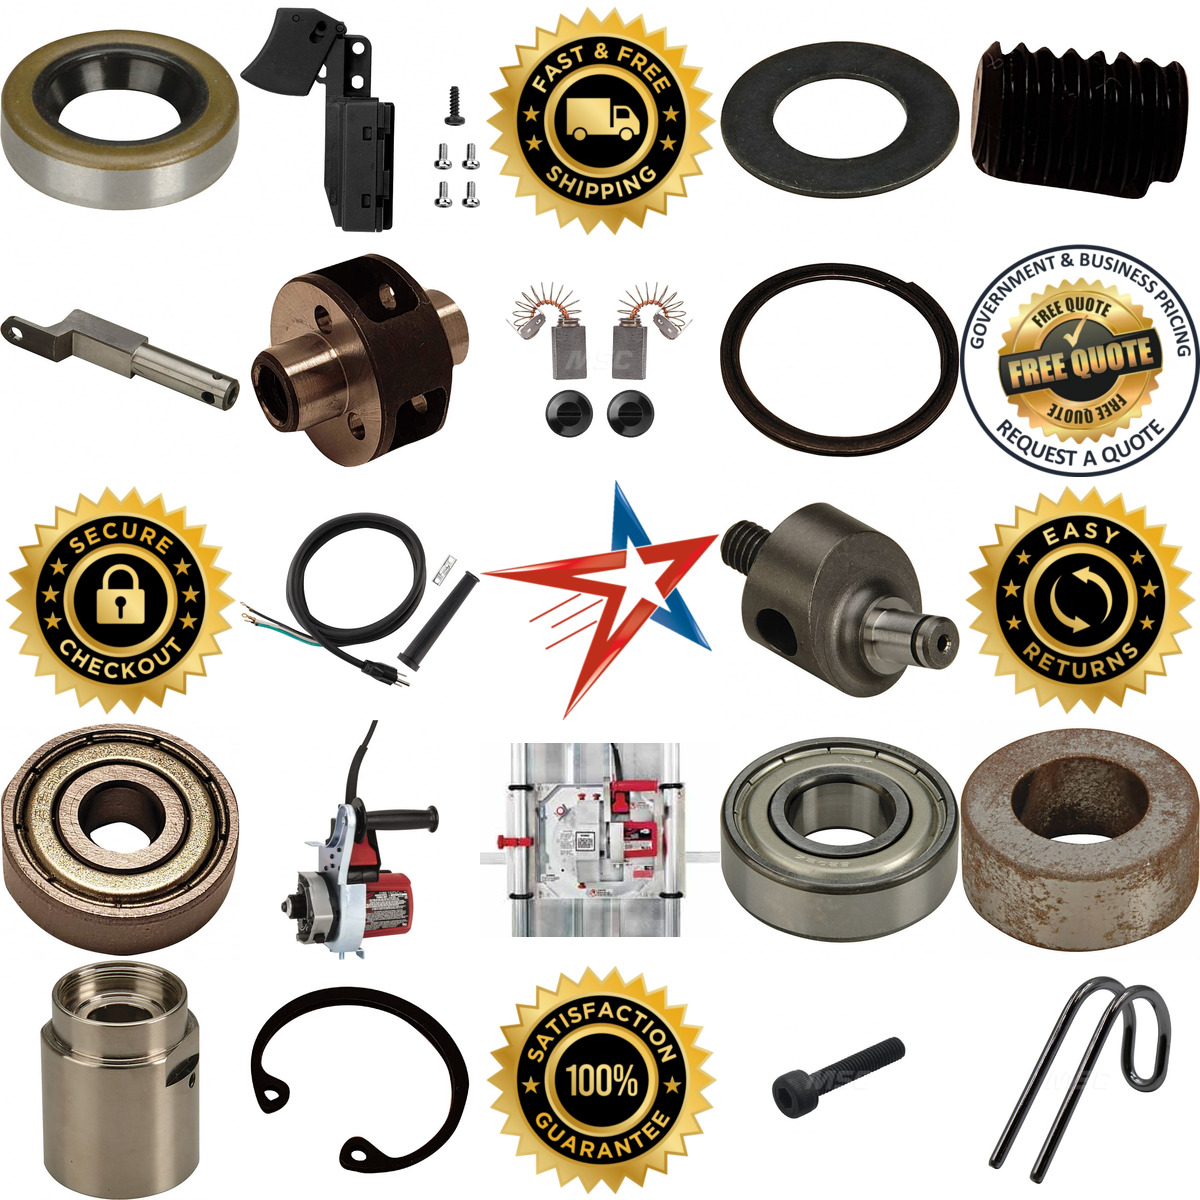 A selection of Power Saw Parts products on GoVets